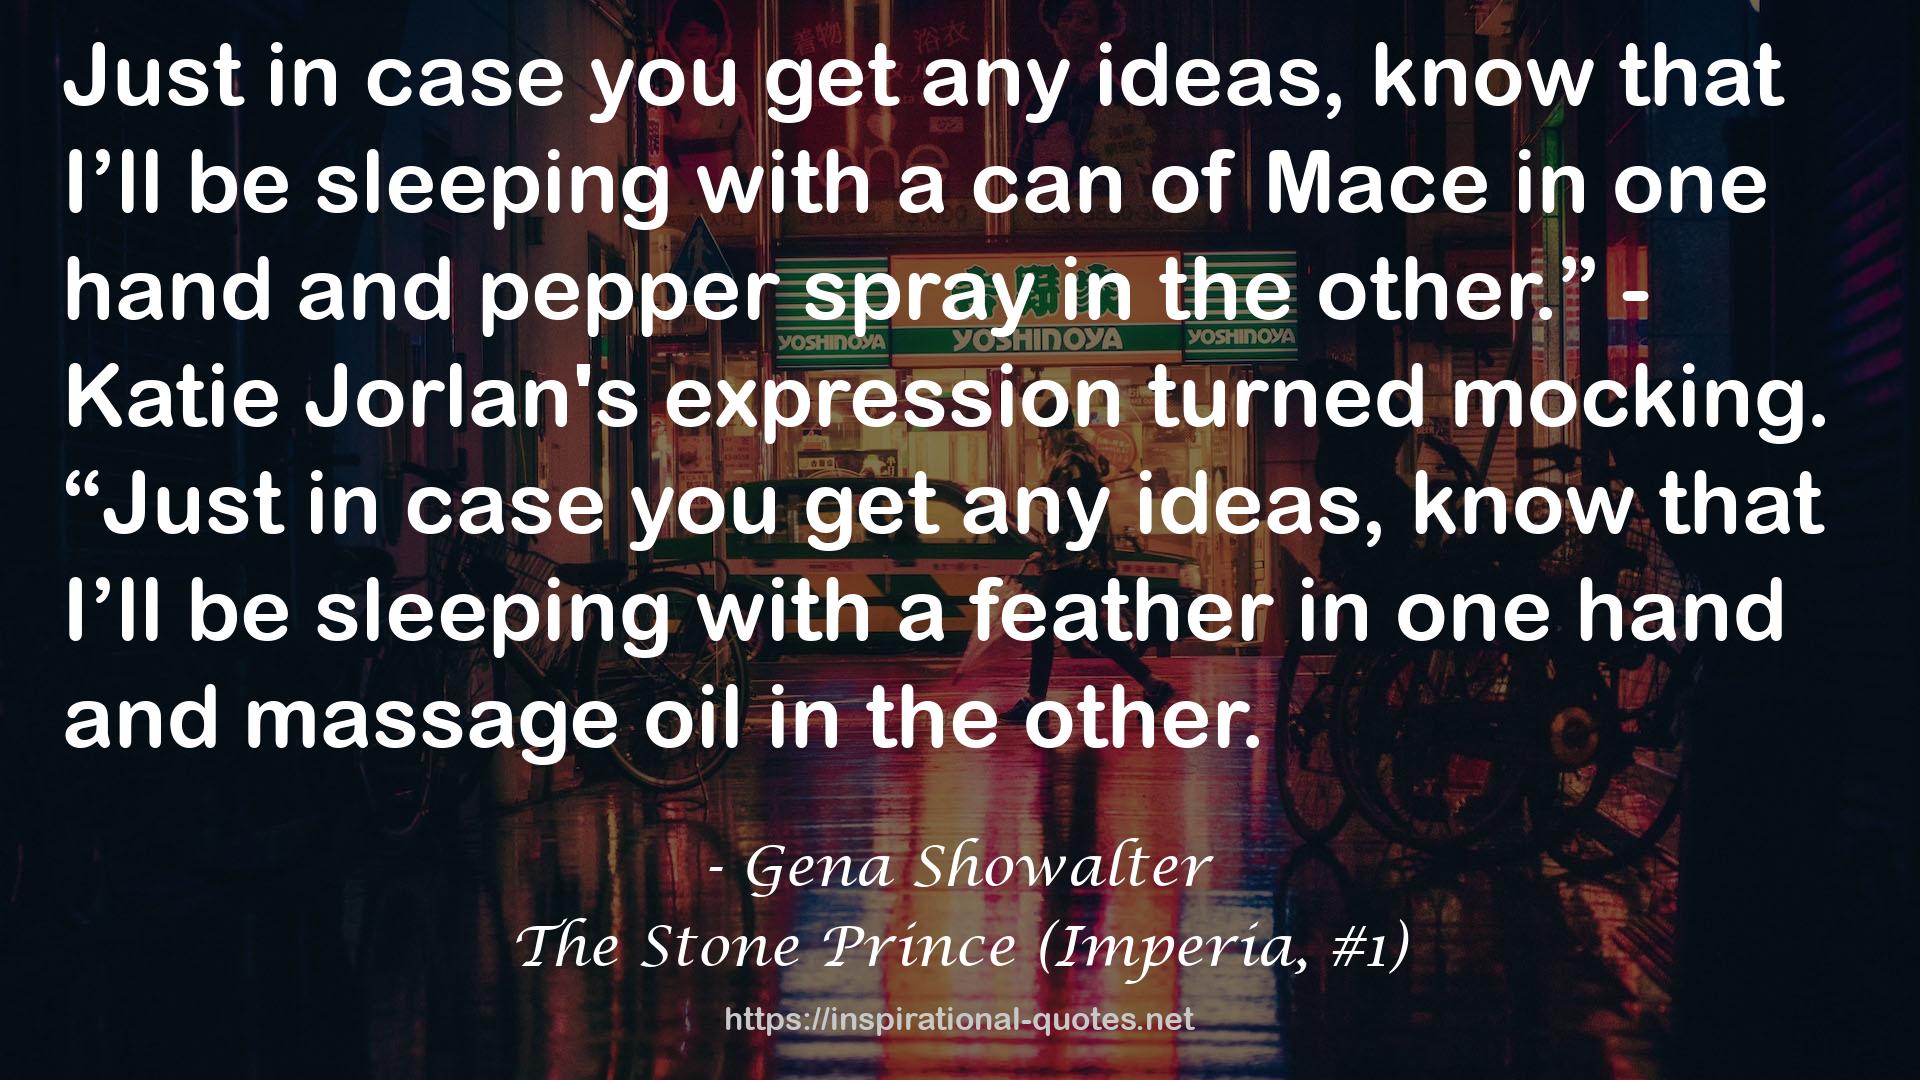 The Stone Prince (Imperia, #1) QUOTES